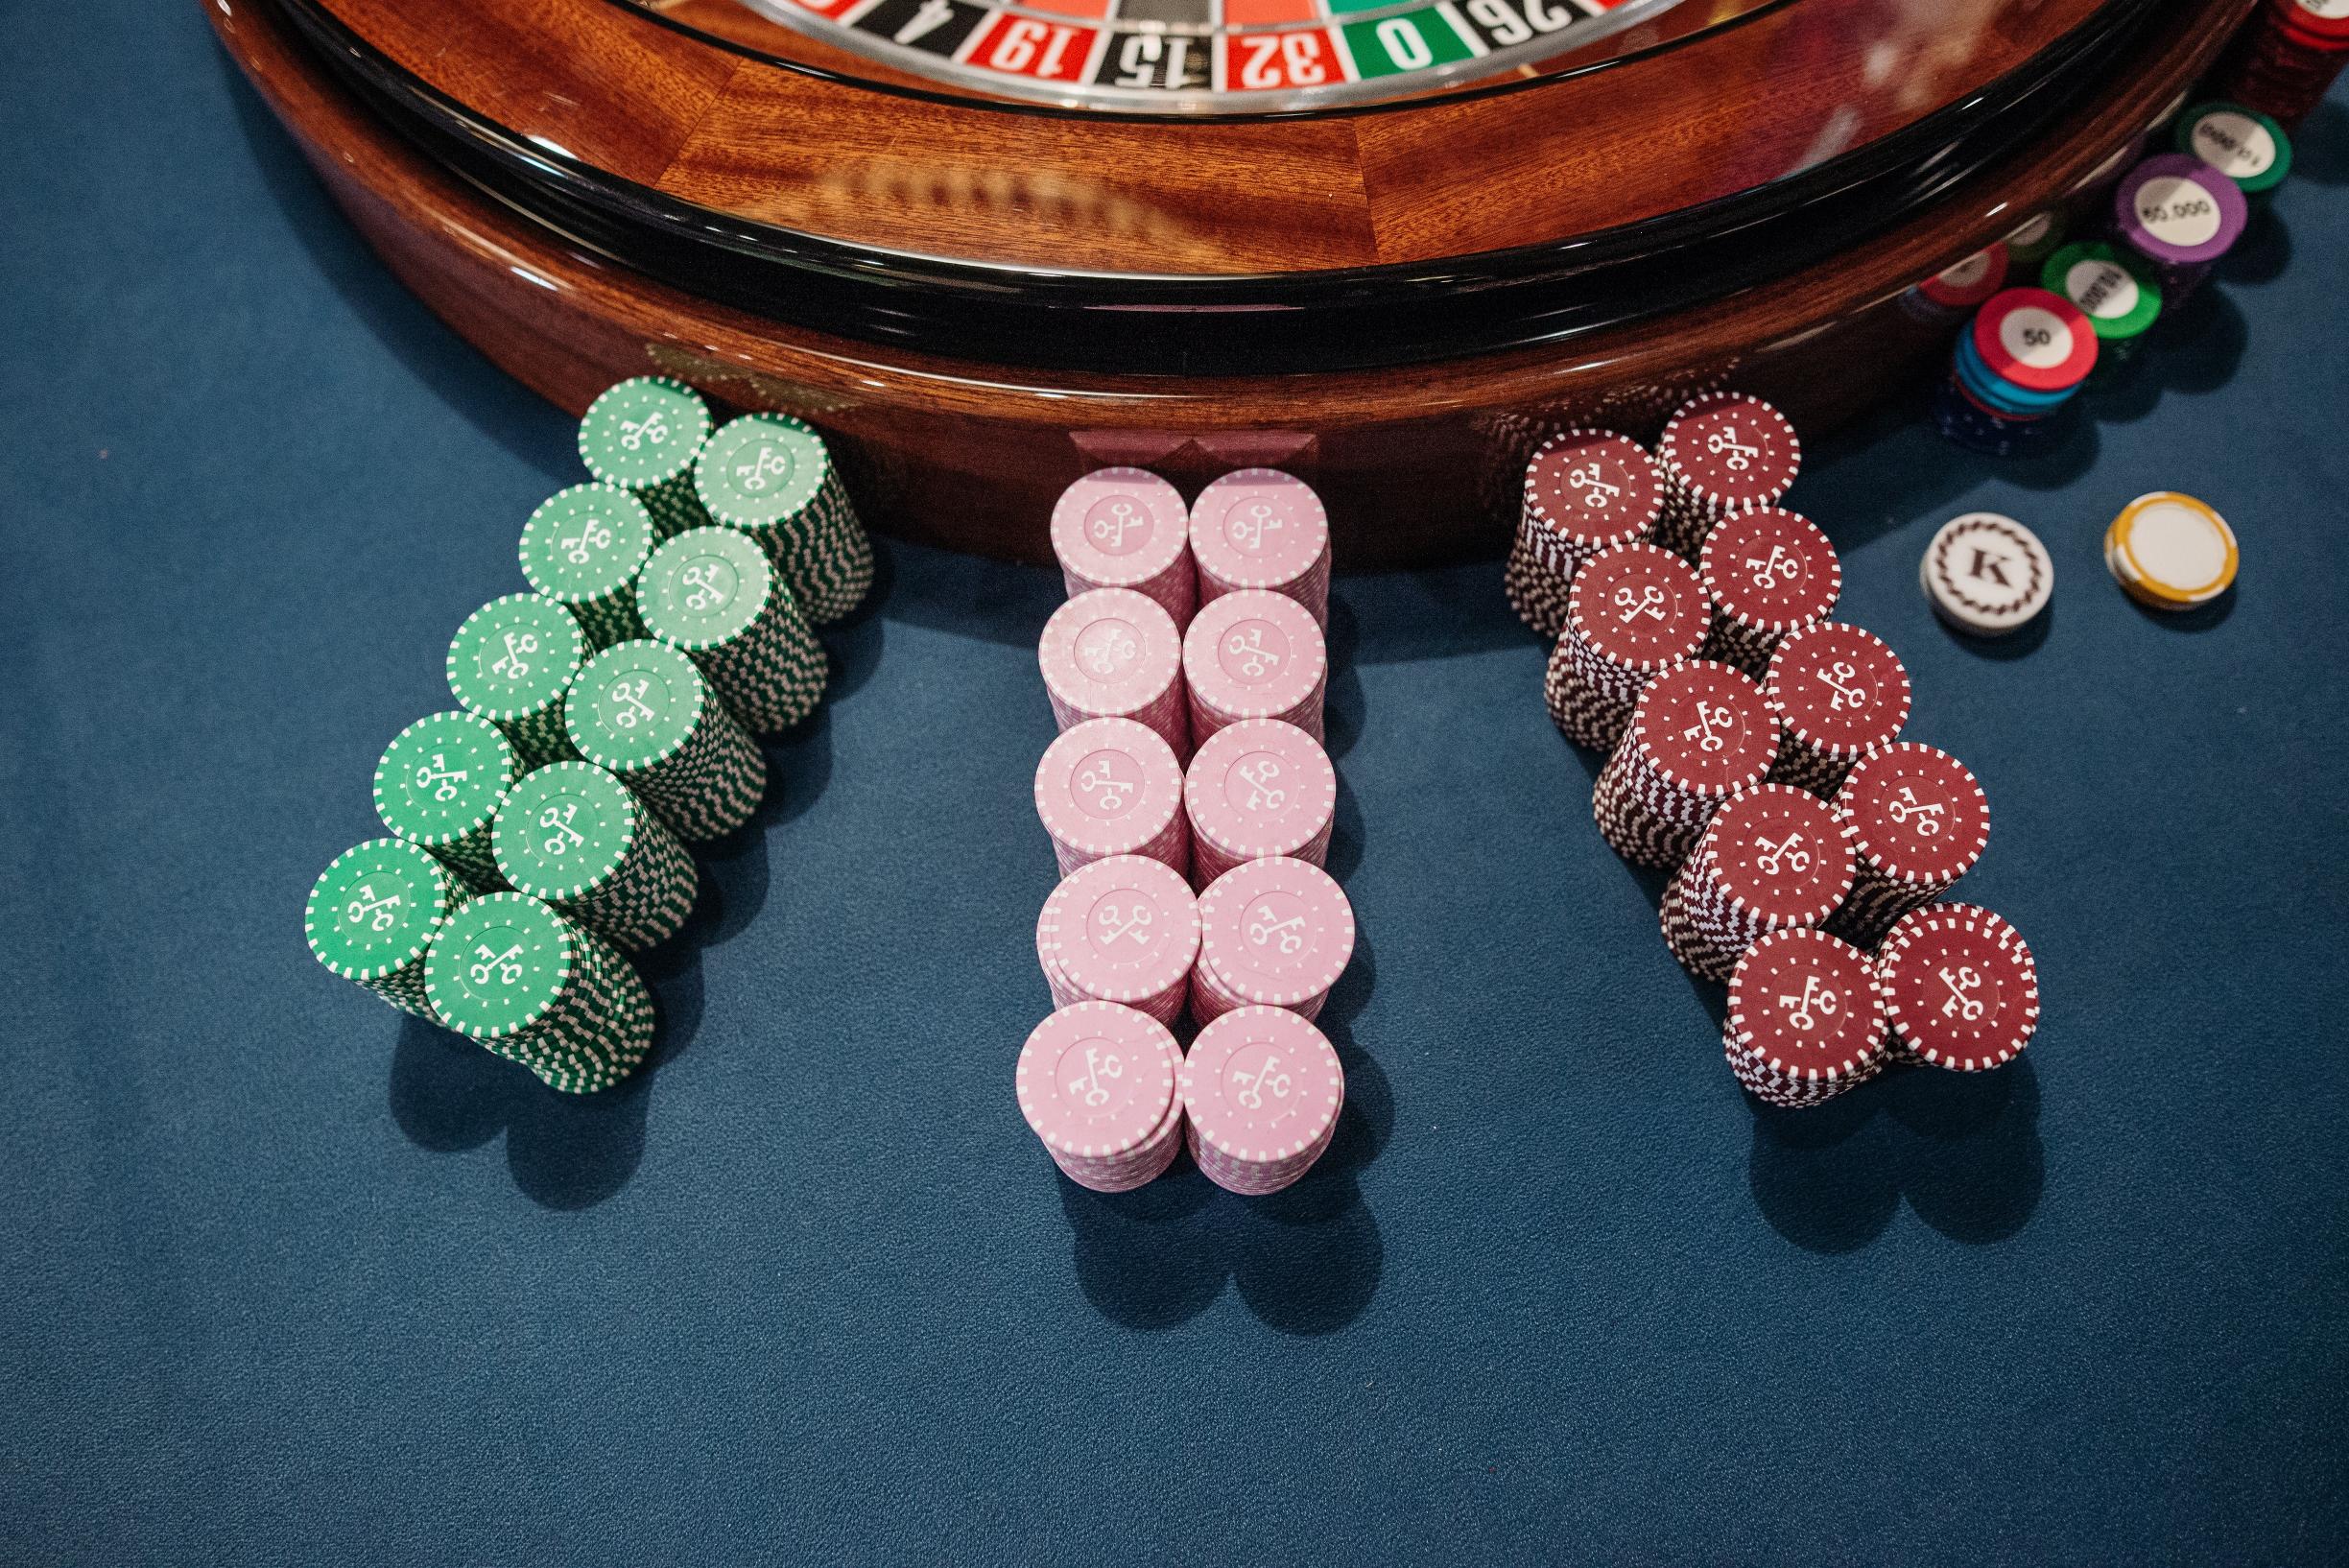 10 Common Mistakes to Avoid While Playing Blackjack